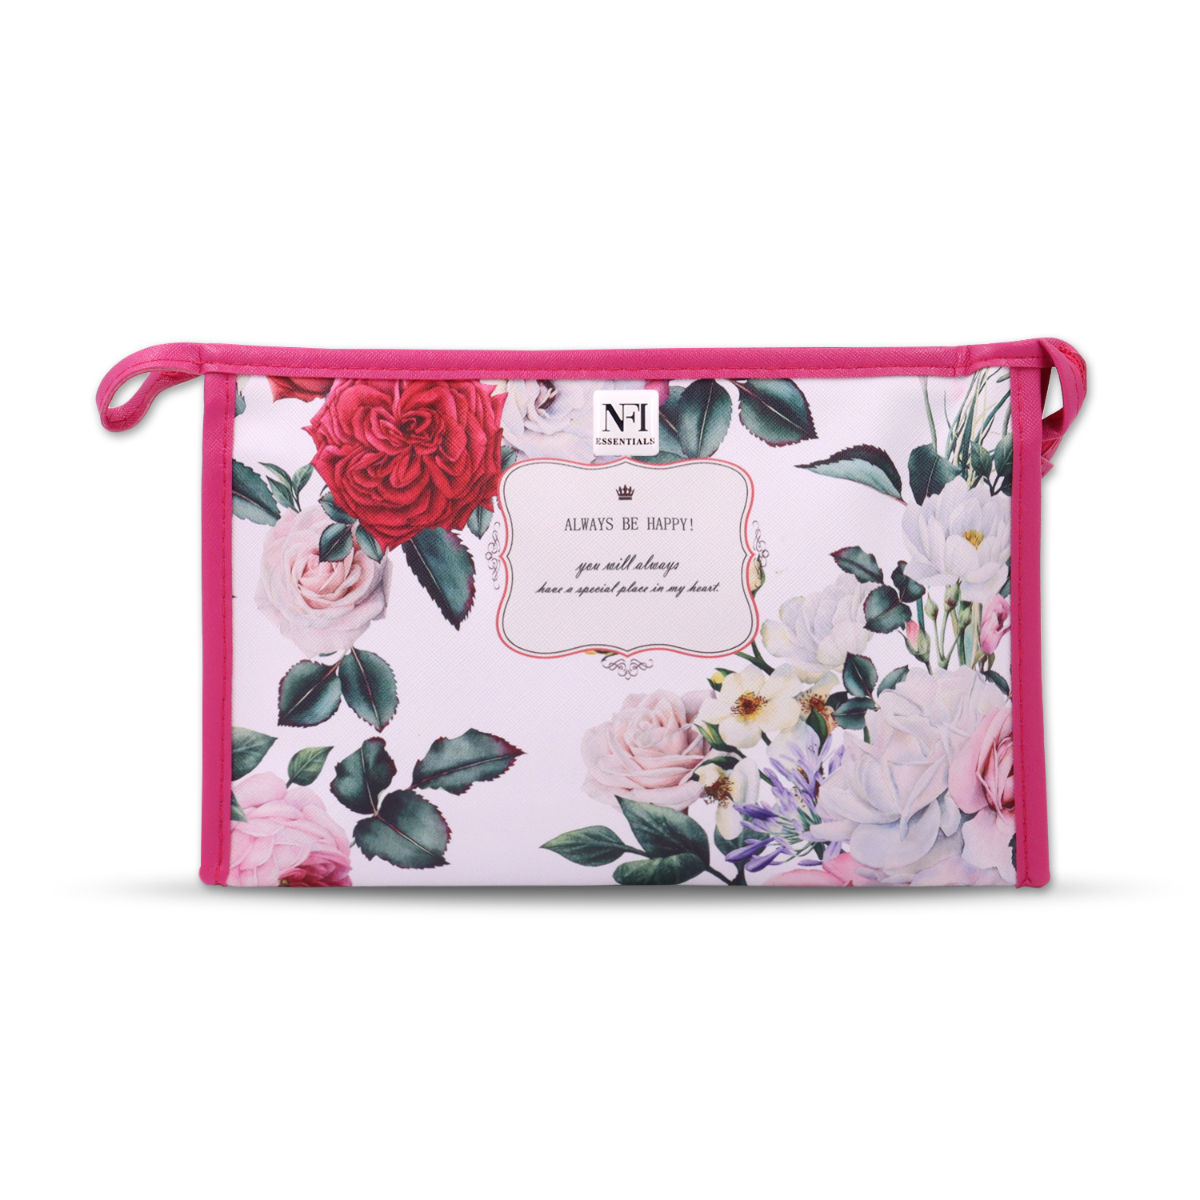 NFI essentials Pu Floral Print Makeup Pouch For Women, Small Stylish  Pouches For Makeup Accessories & Travel Organiser Cosmetic Pouch (Y28),  Multi : Amazon.in: Beauty